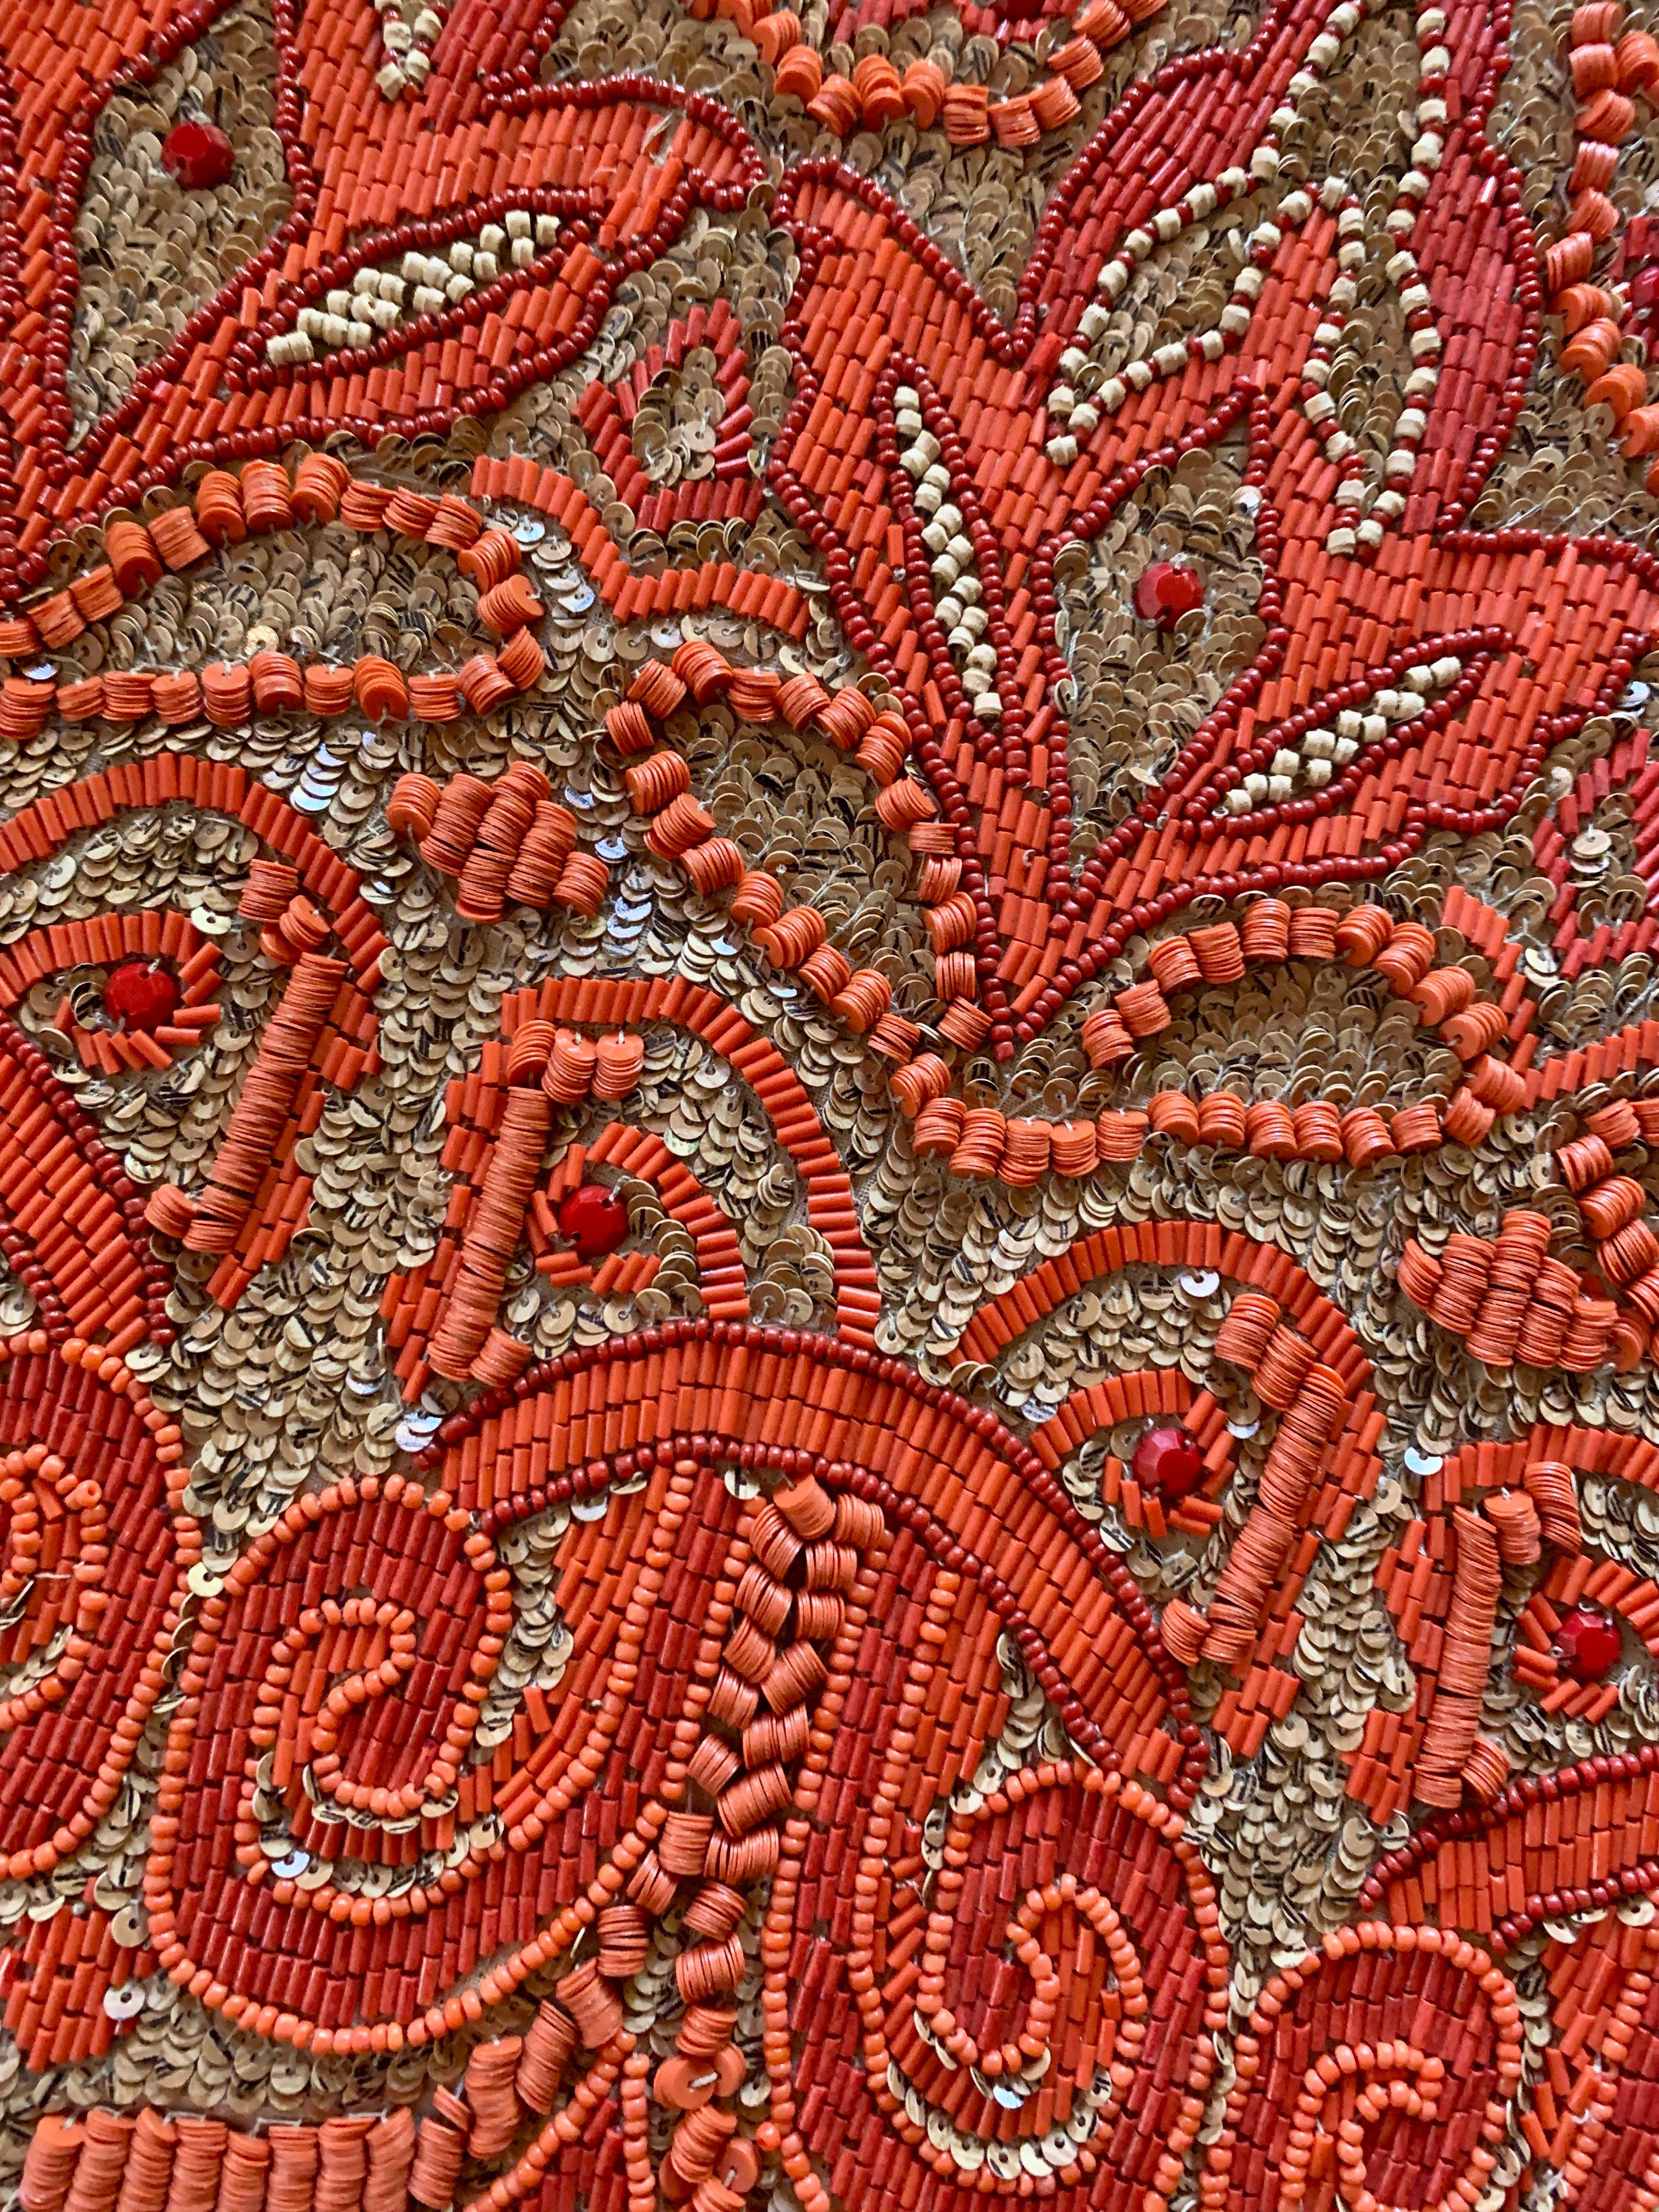 Set of four hand beaded placemats. The unique designed placemats are hand beaded with Glass, Wood and plastic beads - the shape is a departure from the standard oval or rectangular. Brilliant orange beads on a woven raffia field makes for the